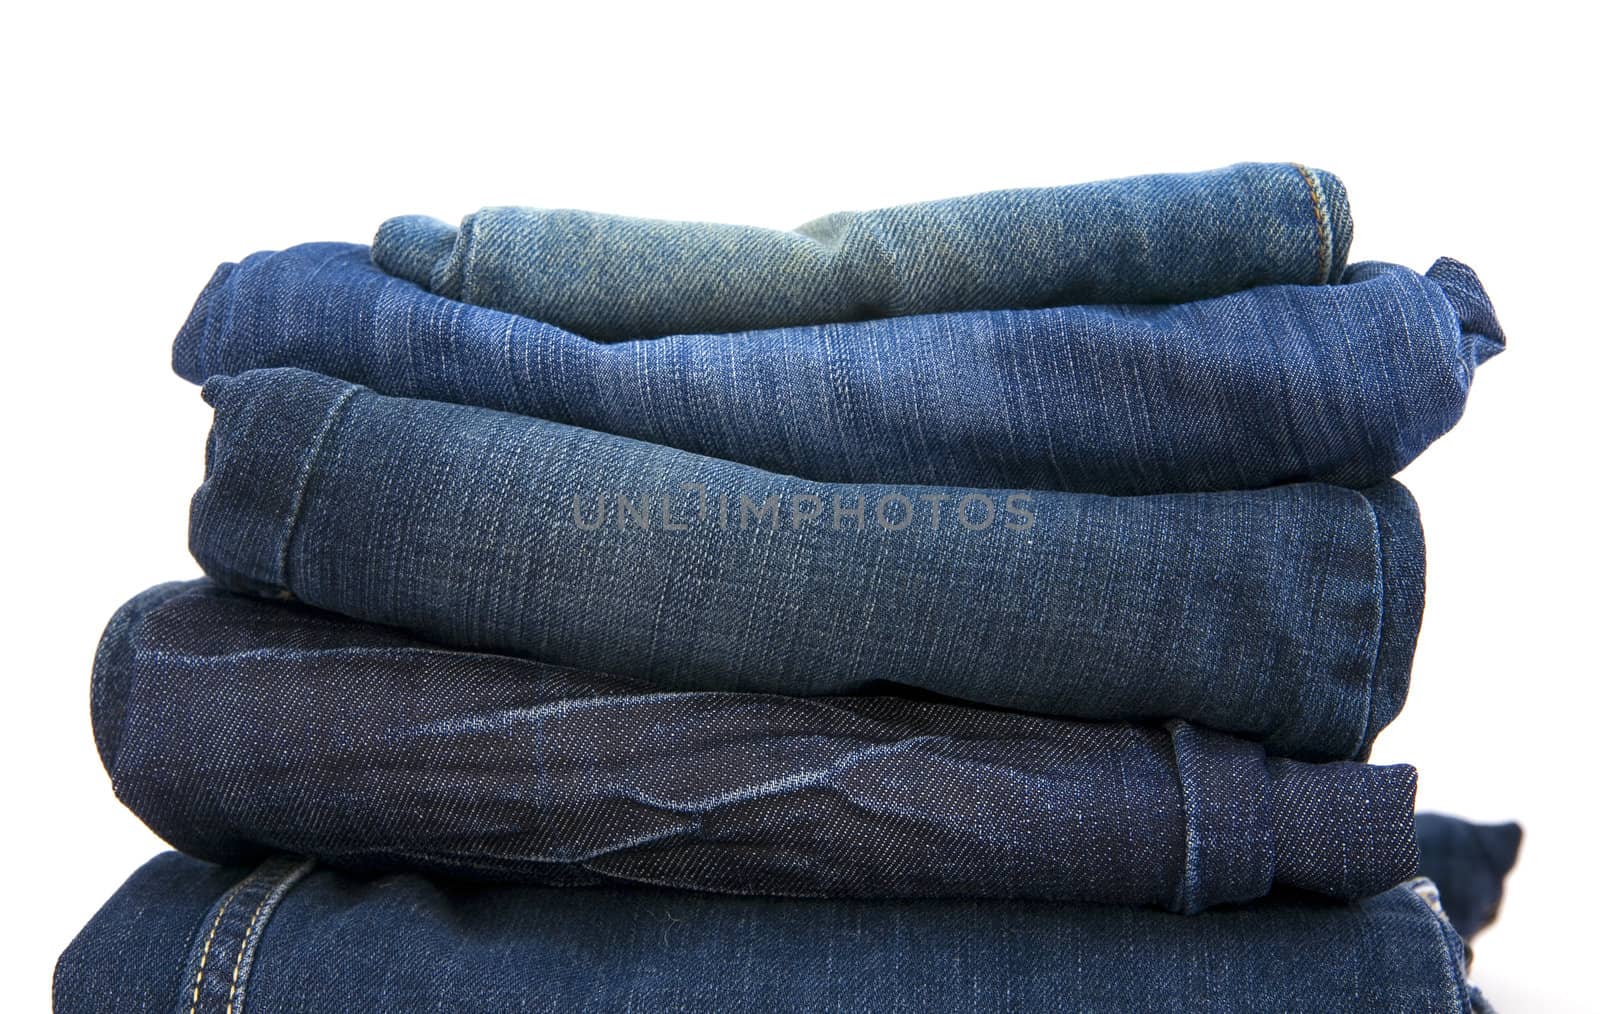 folded new blue jeans by Serp